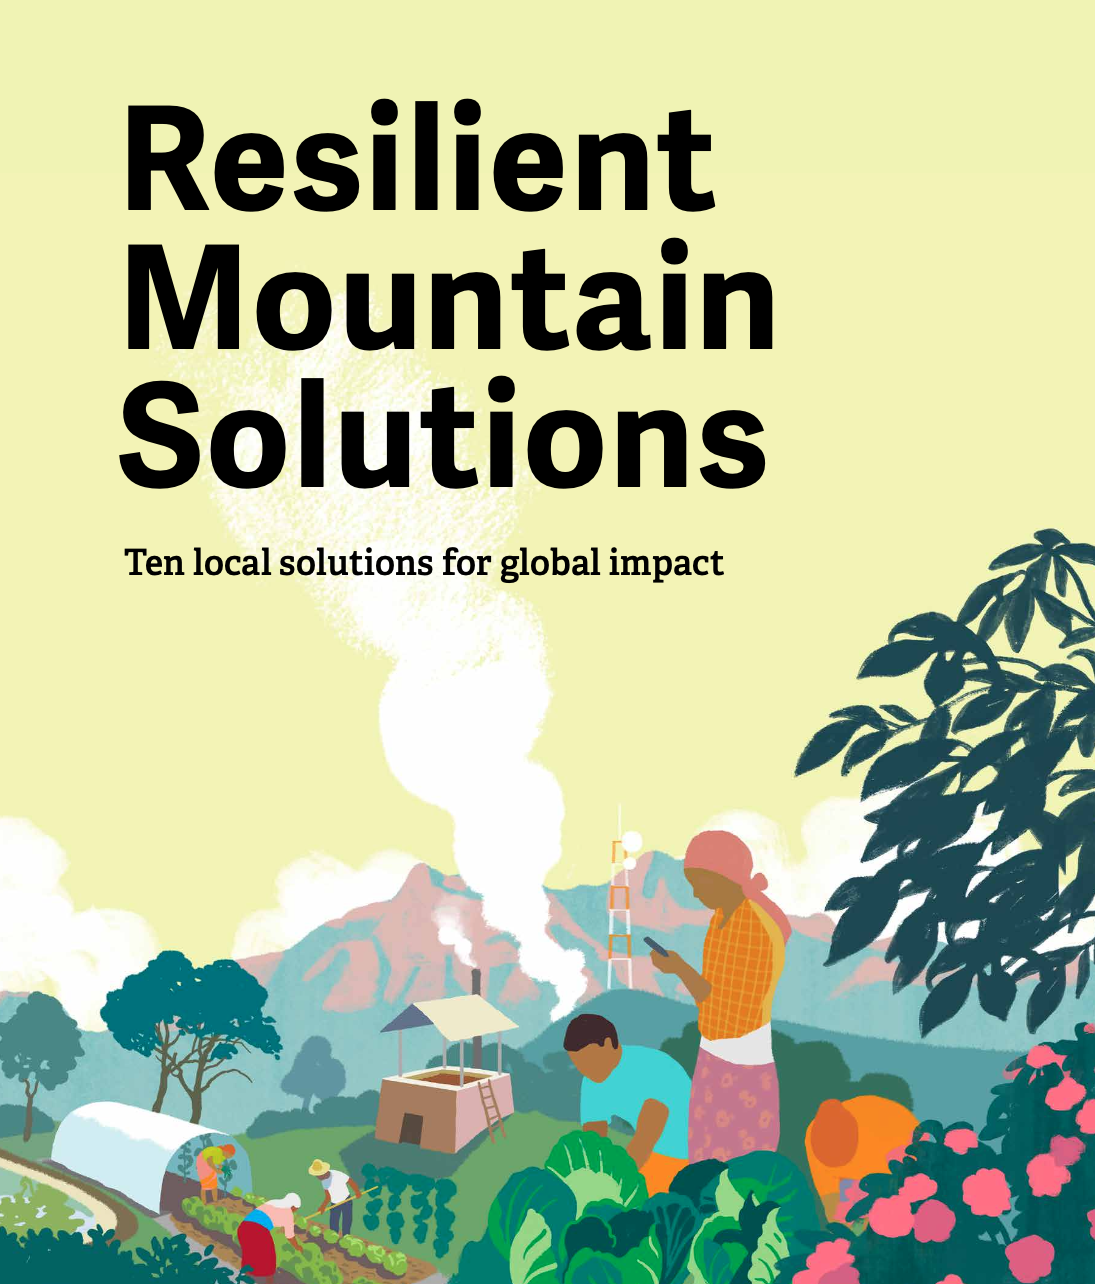 Resilient Mountain Solutions: Ten local solutions for global impact